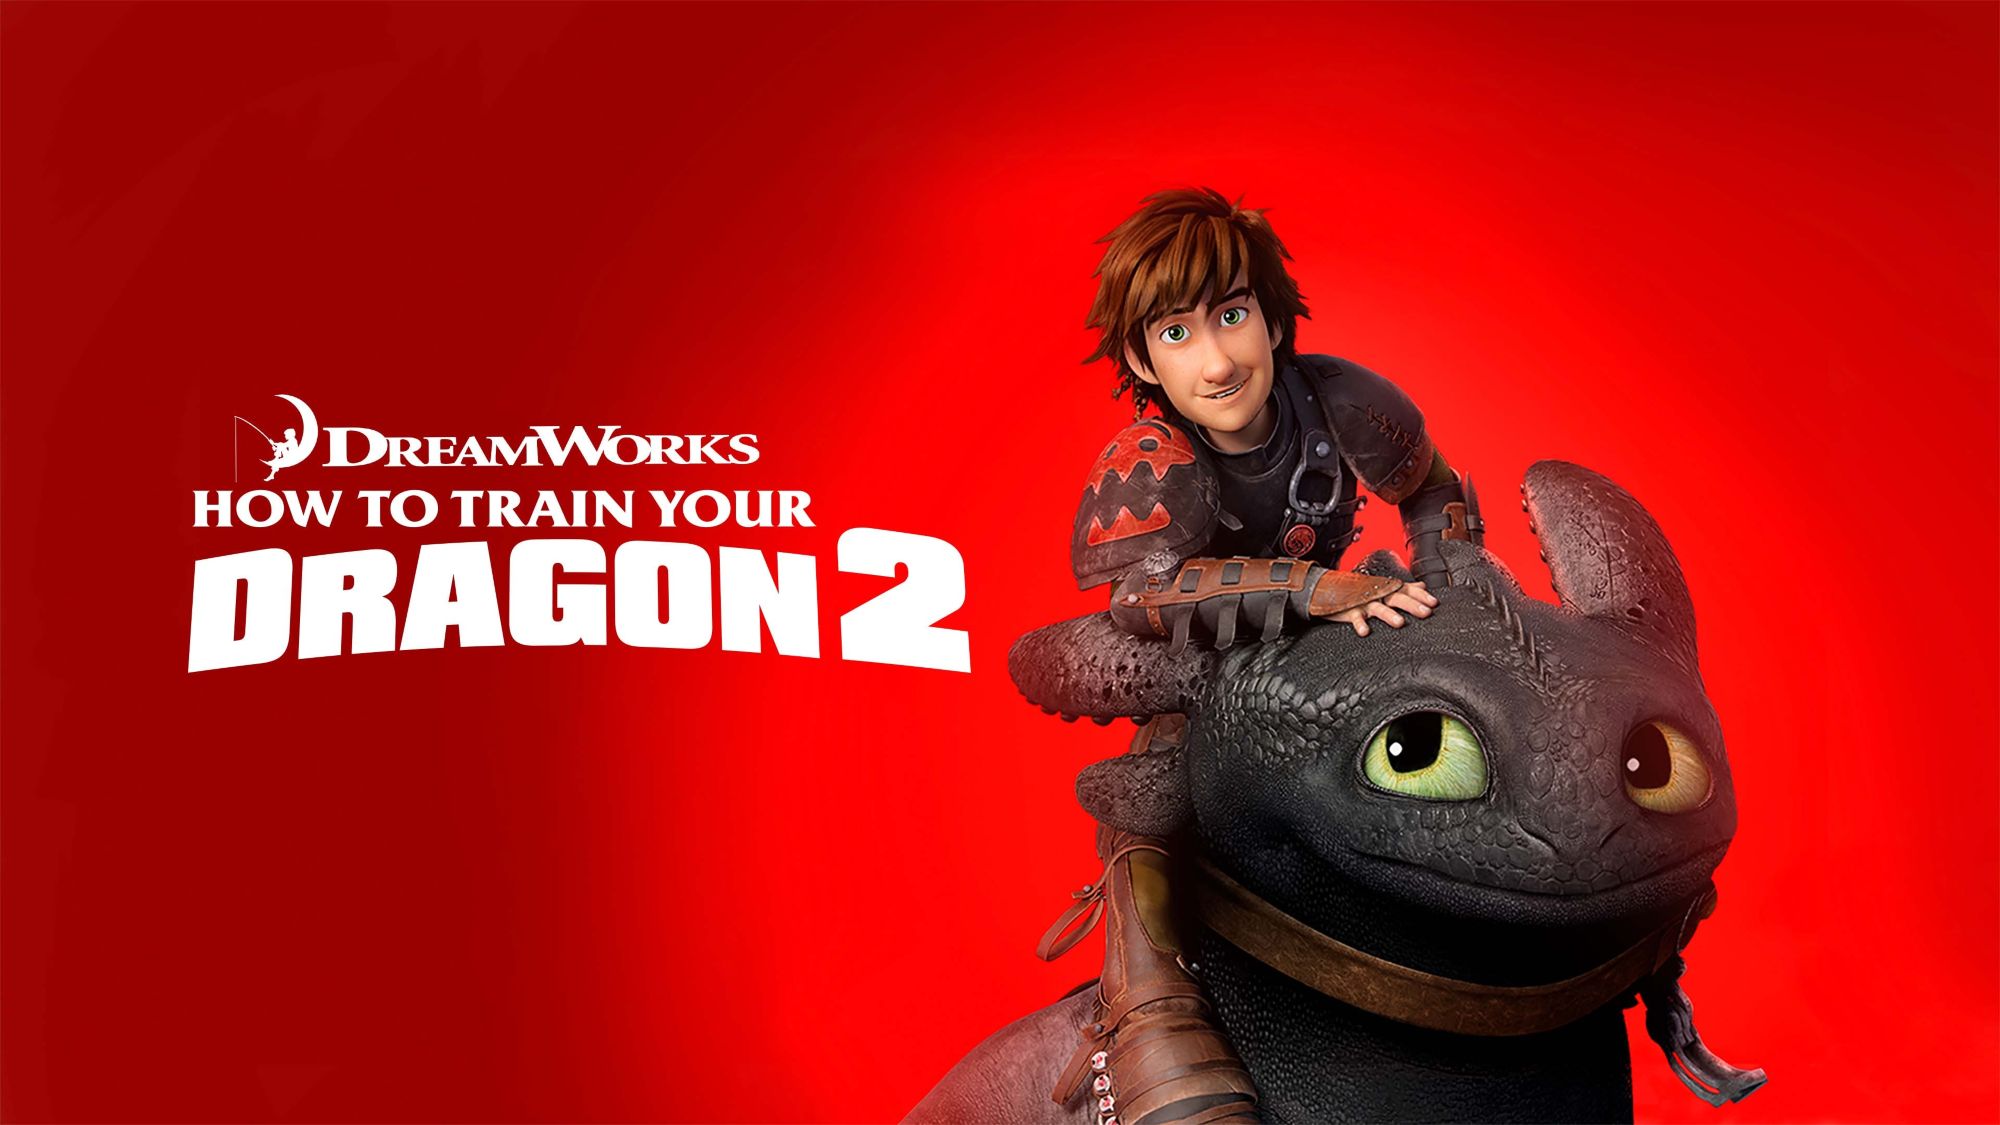 38-facts-about-the-movie-how-to-train-your-dragon-2